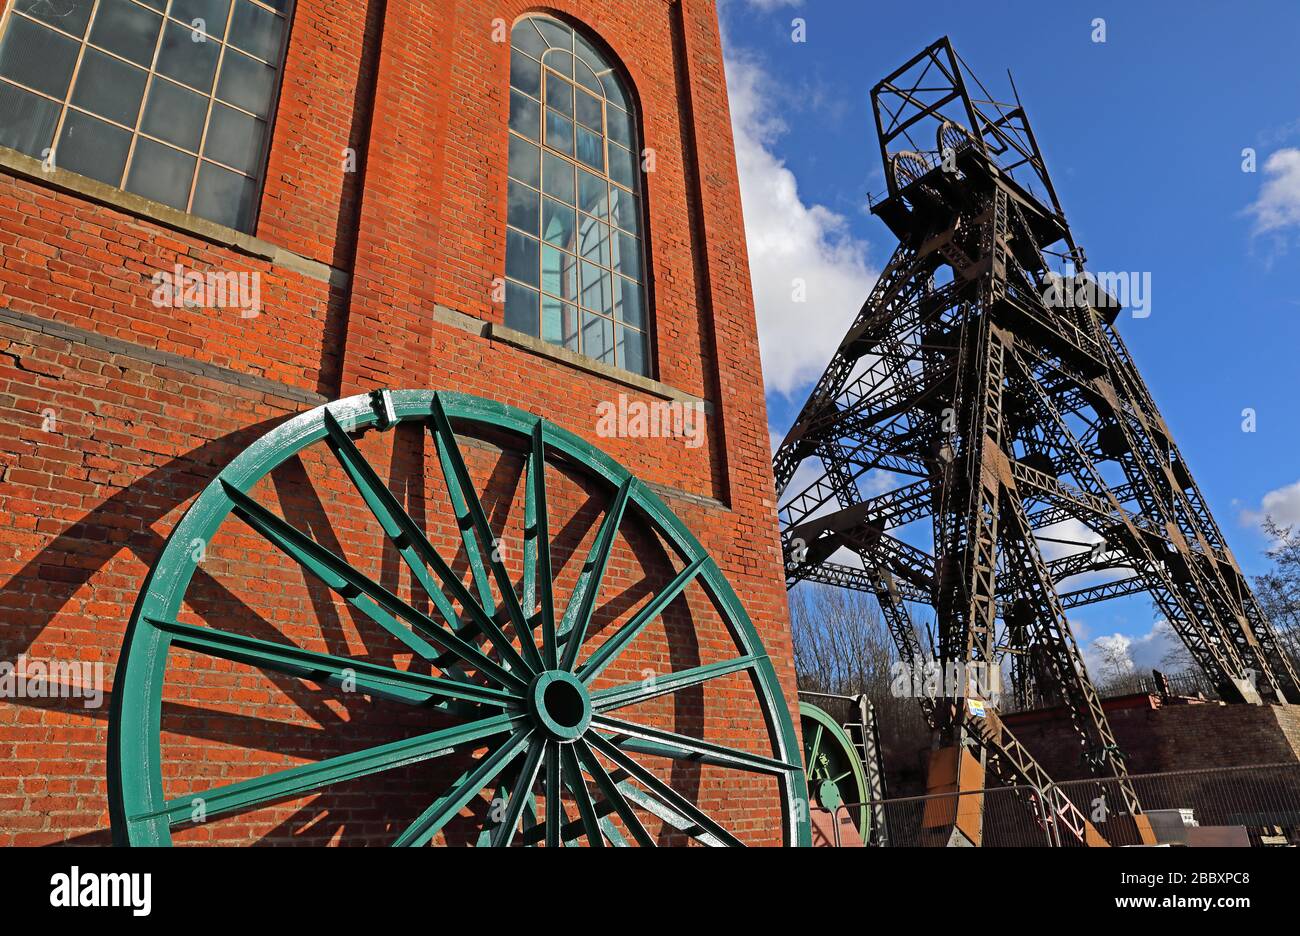 Winding Gear and Pit Head, Coal Mine, Colliery and Museum, Astley Green, Manchester, Lancashire, North West England, UK Foto Stock